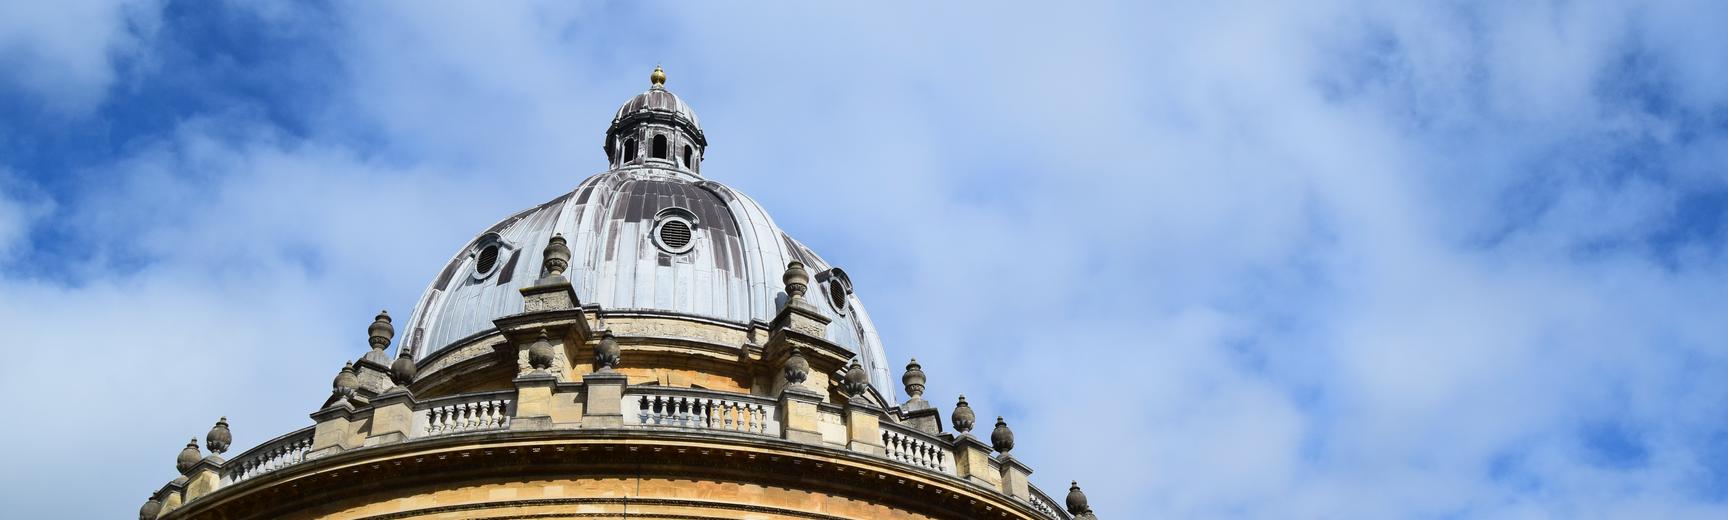 A view of the circular Radcliffe Camera library showing the blue-grey leaded roof and yellow standstone walls against a bright blue sky with whispy clouds